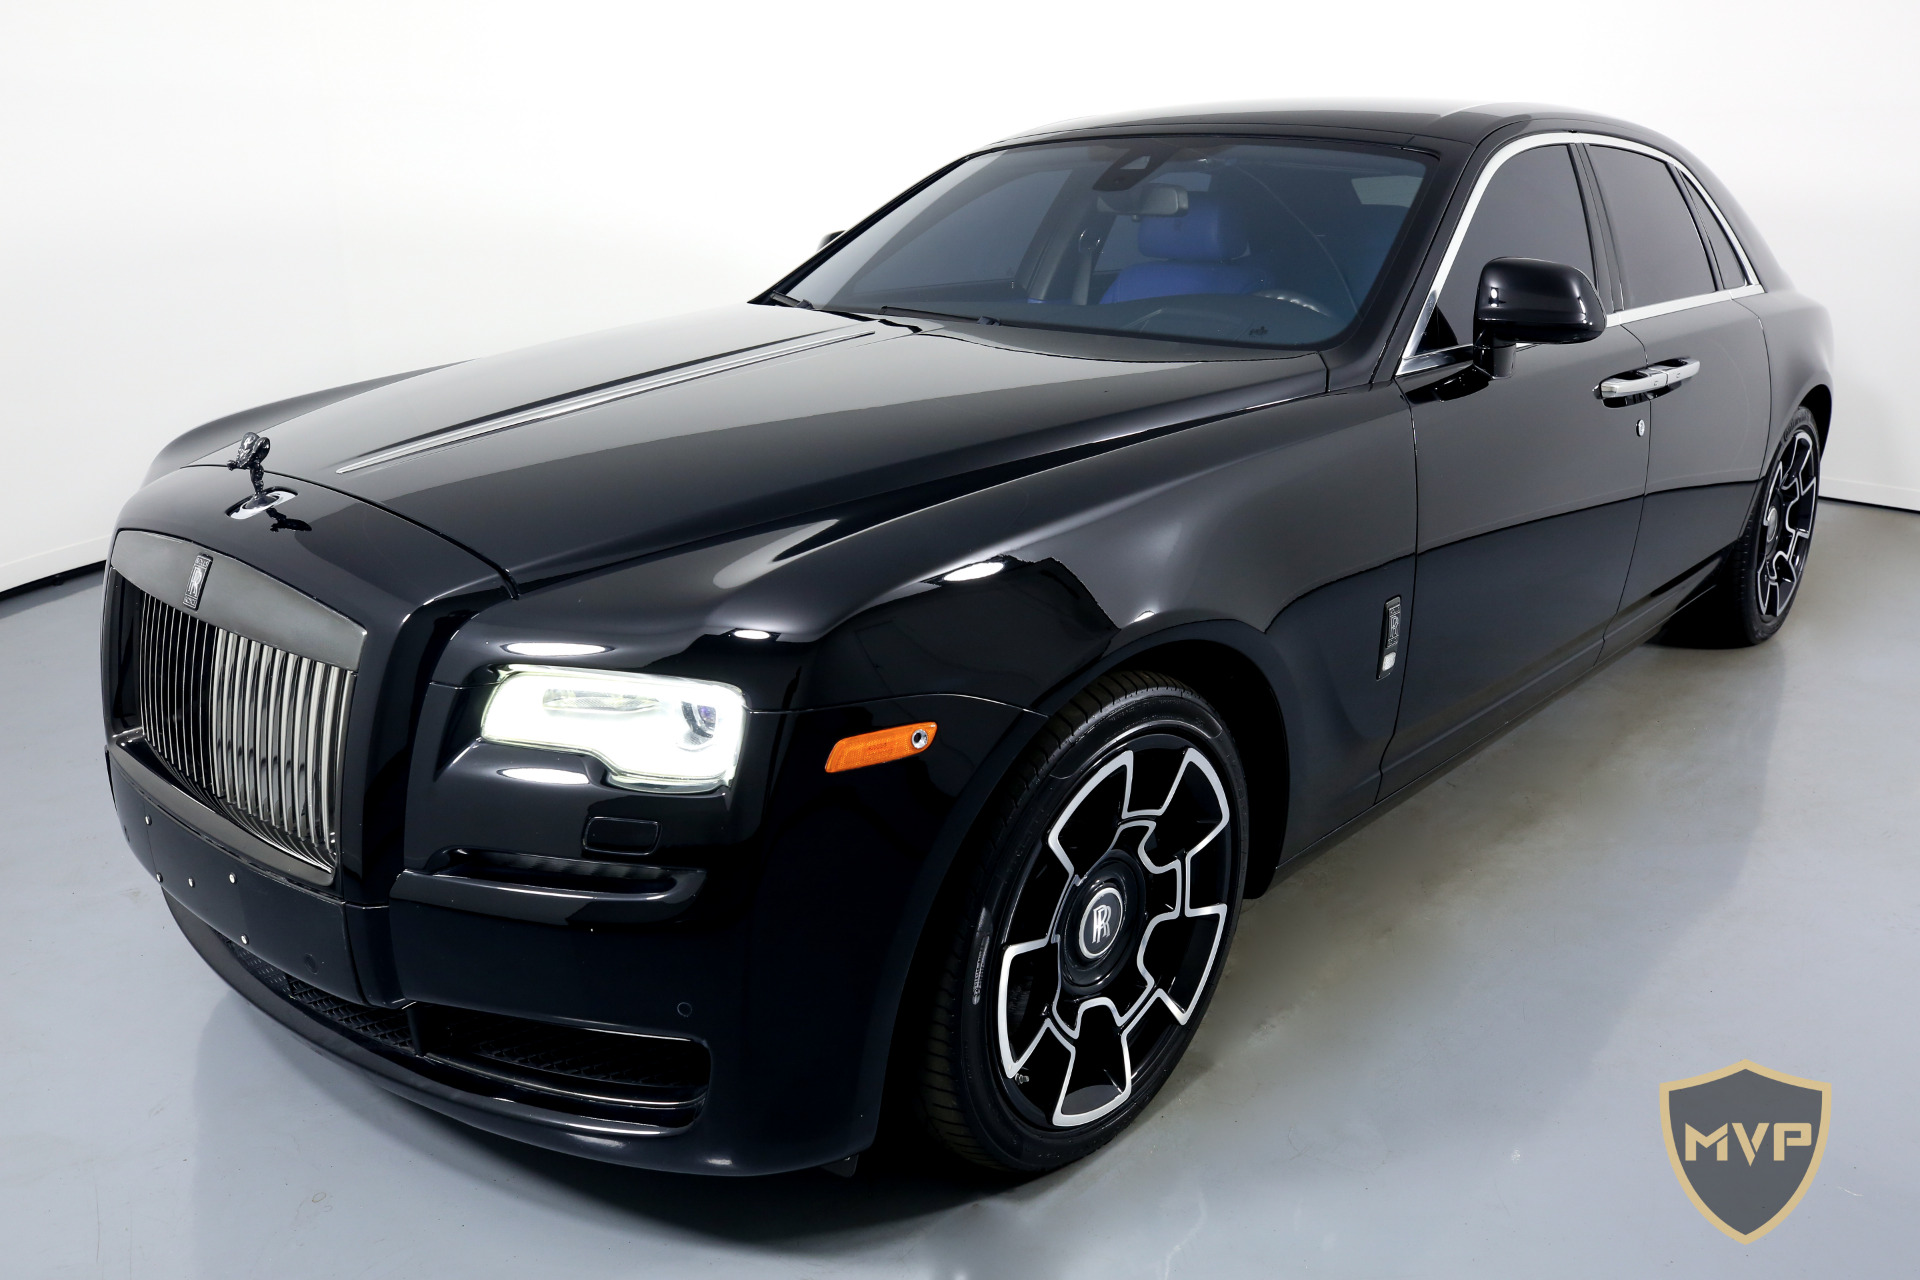 Used 2017 RollsRoyce Ghost Black Badge For Sale Sold  iLusso Stock  X54294